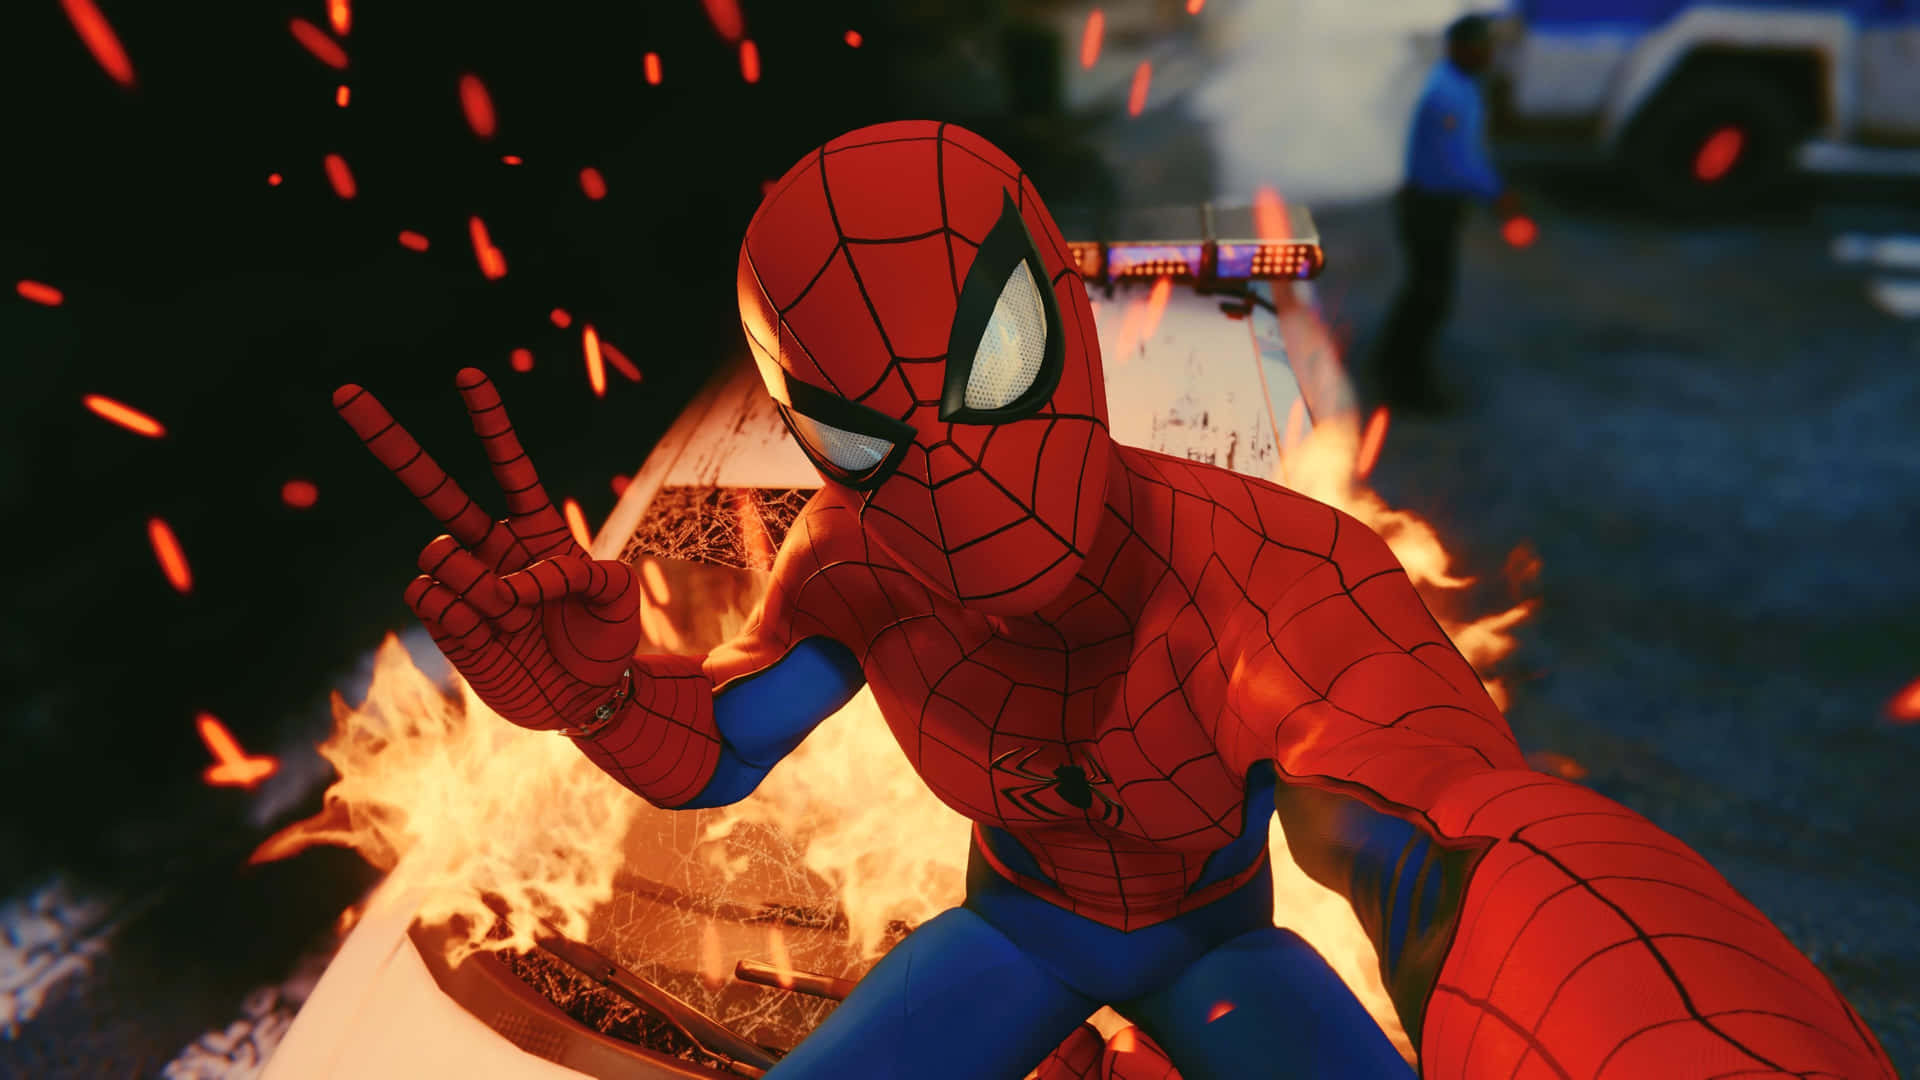 Spider Man Ps4 4k Peace Pose Fire Explosion Background Wallpaper